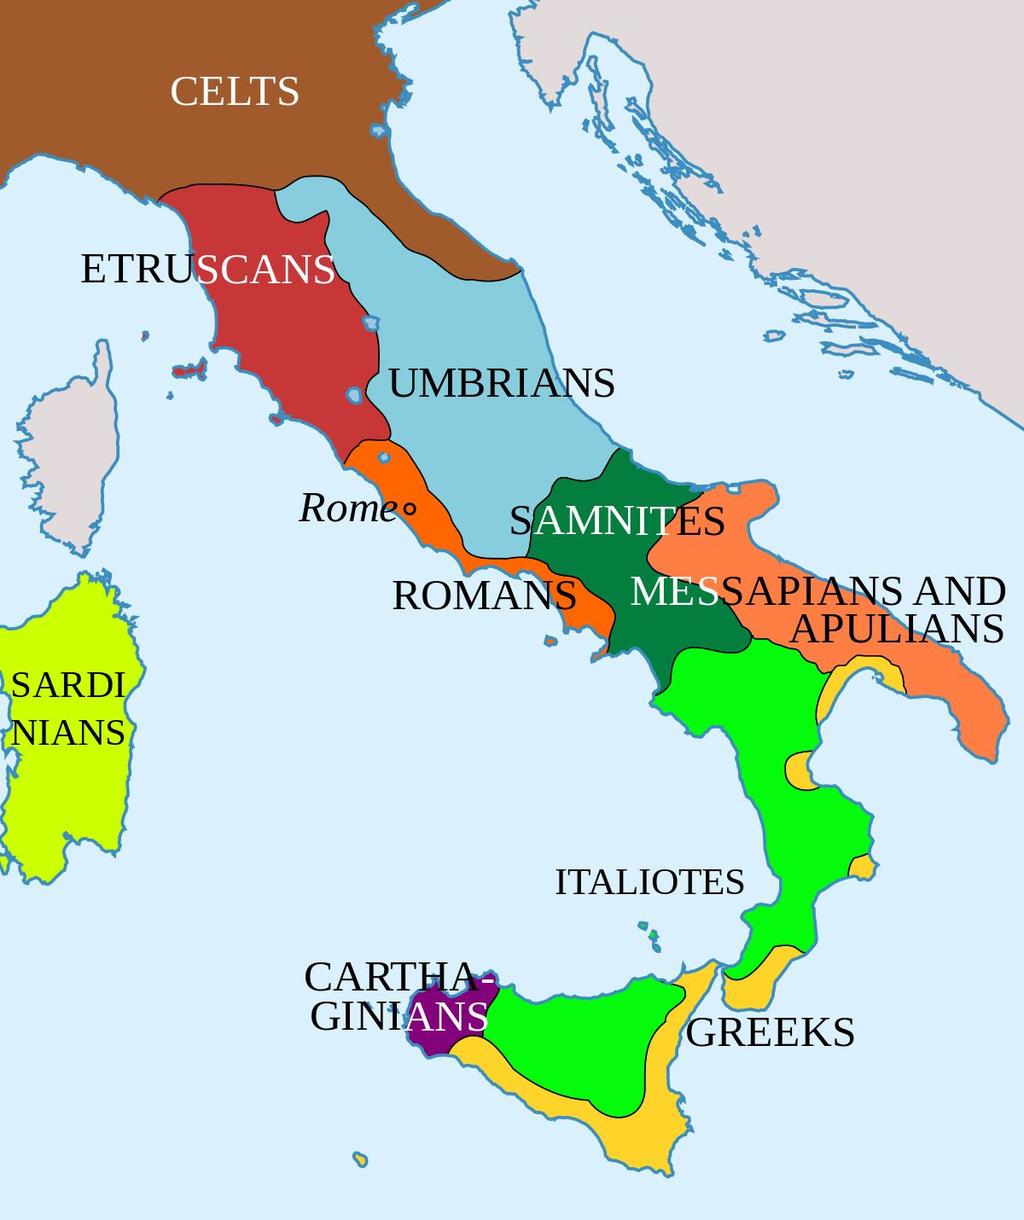 The Etruscans Their origins are not known Believed they migrated from